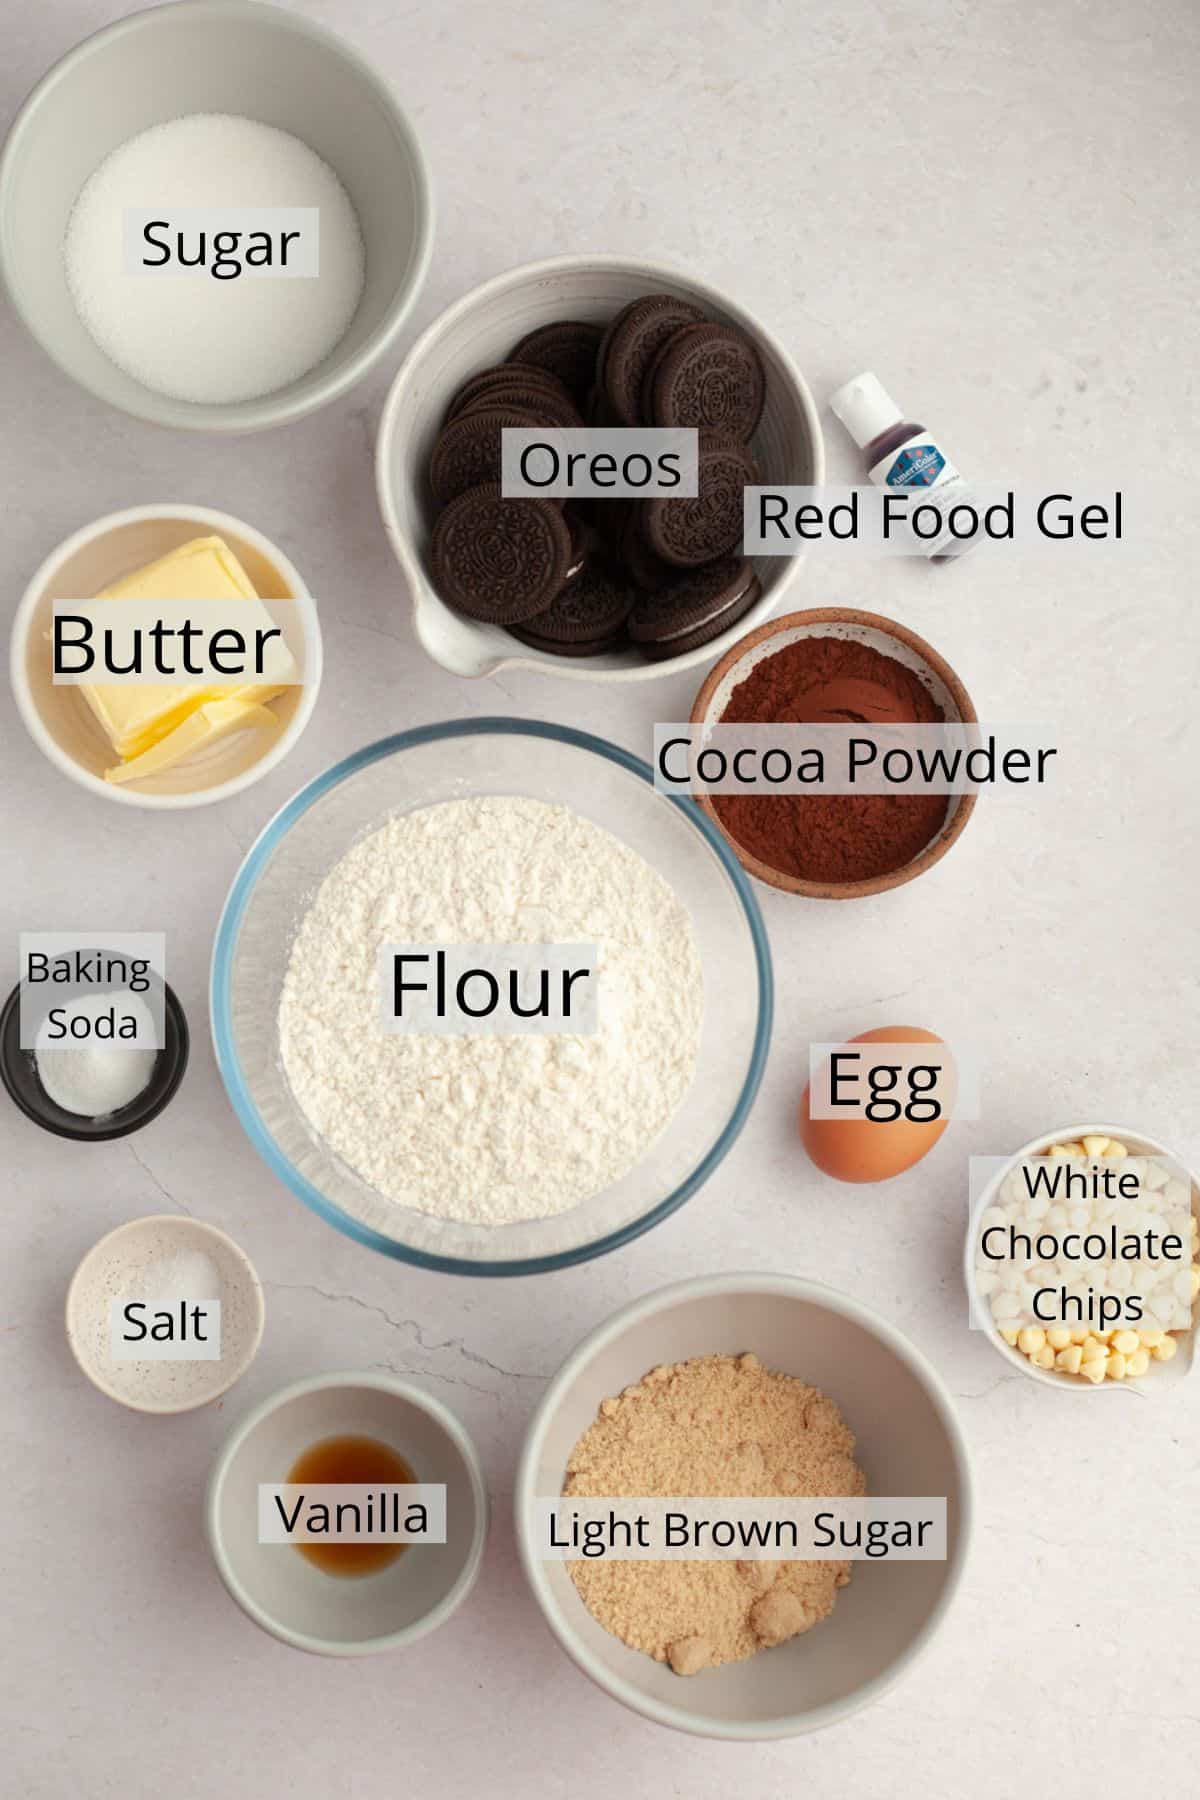 All the ingredients needed to make red velvet Oreo cookies weighed out into small bowls.